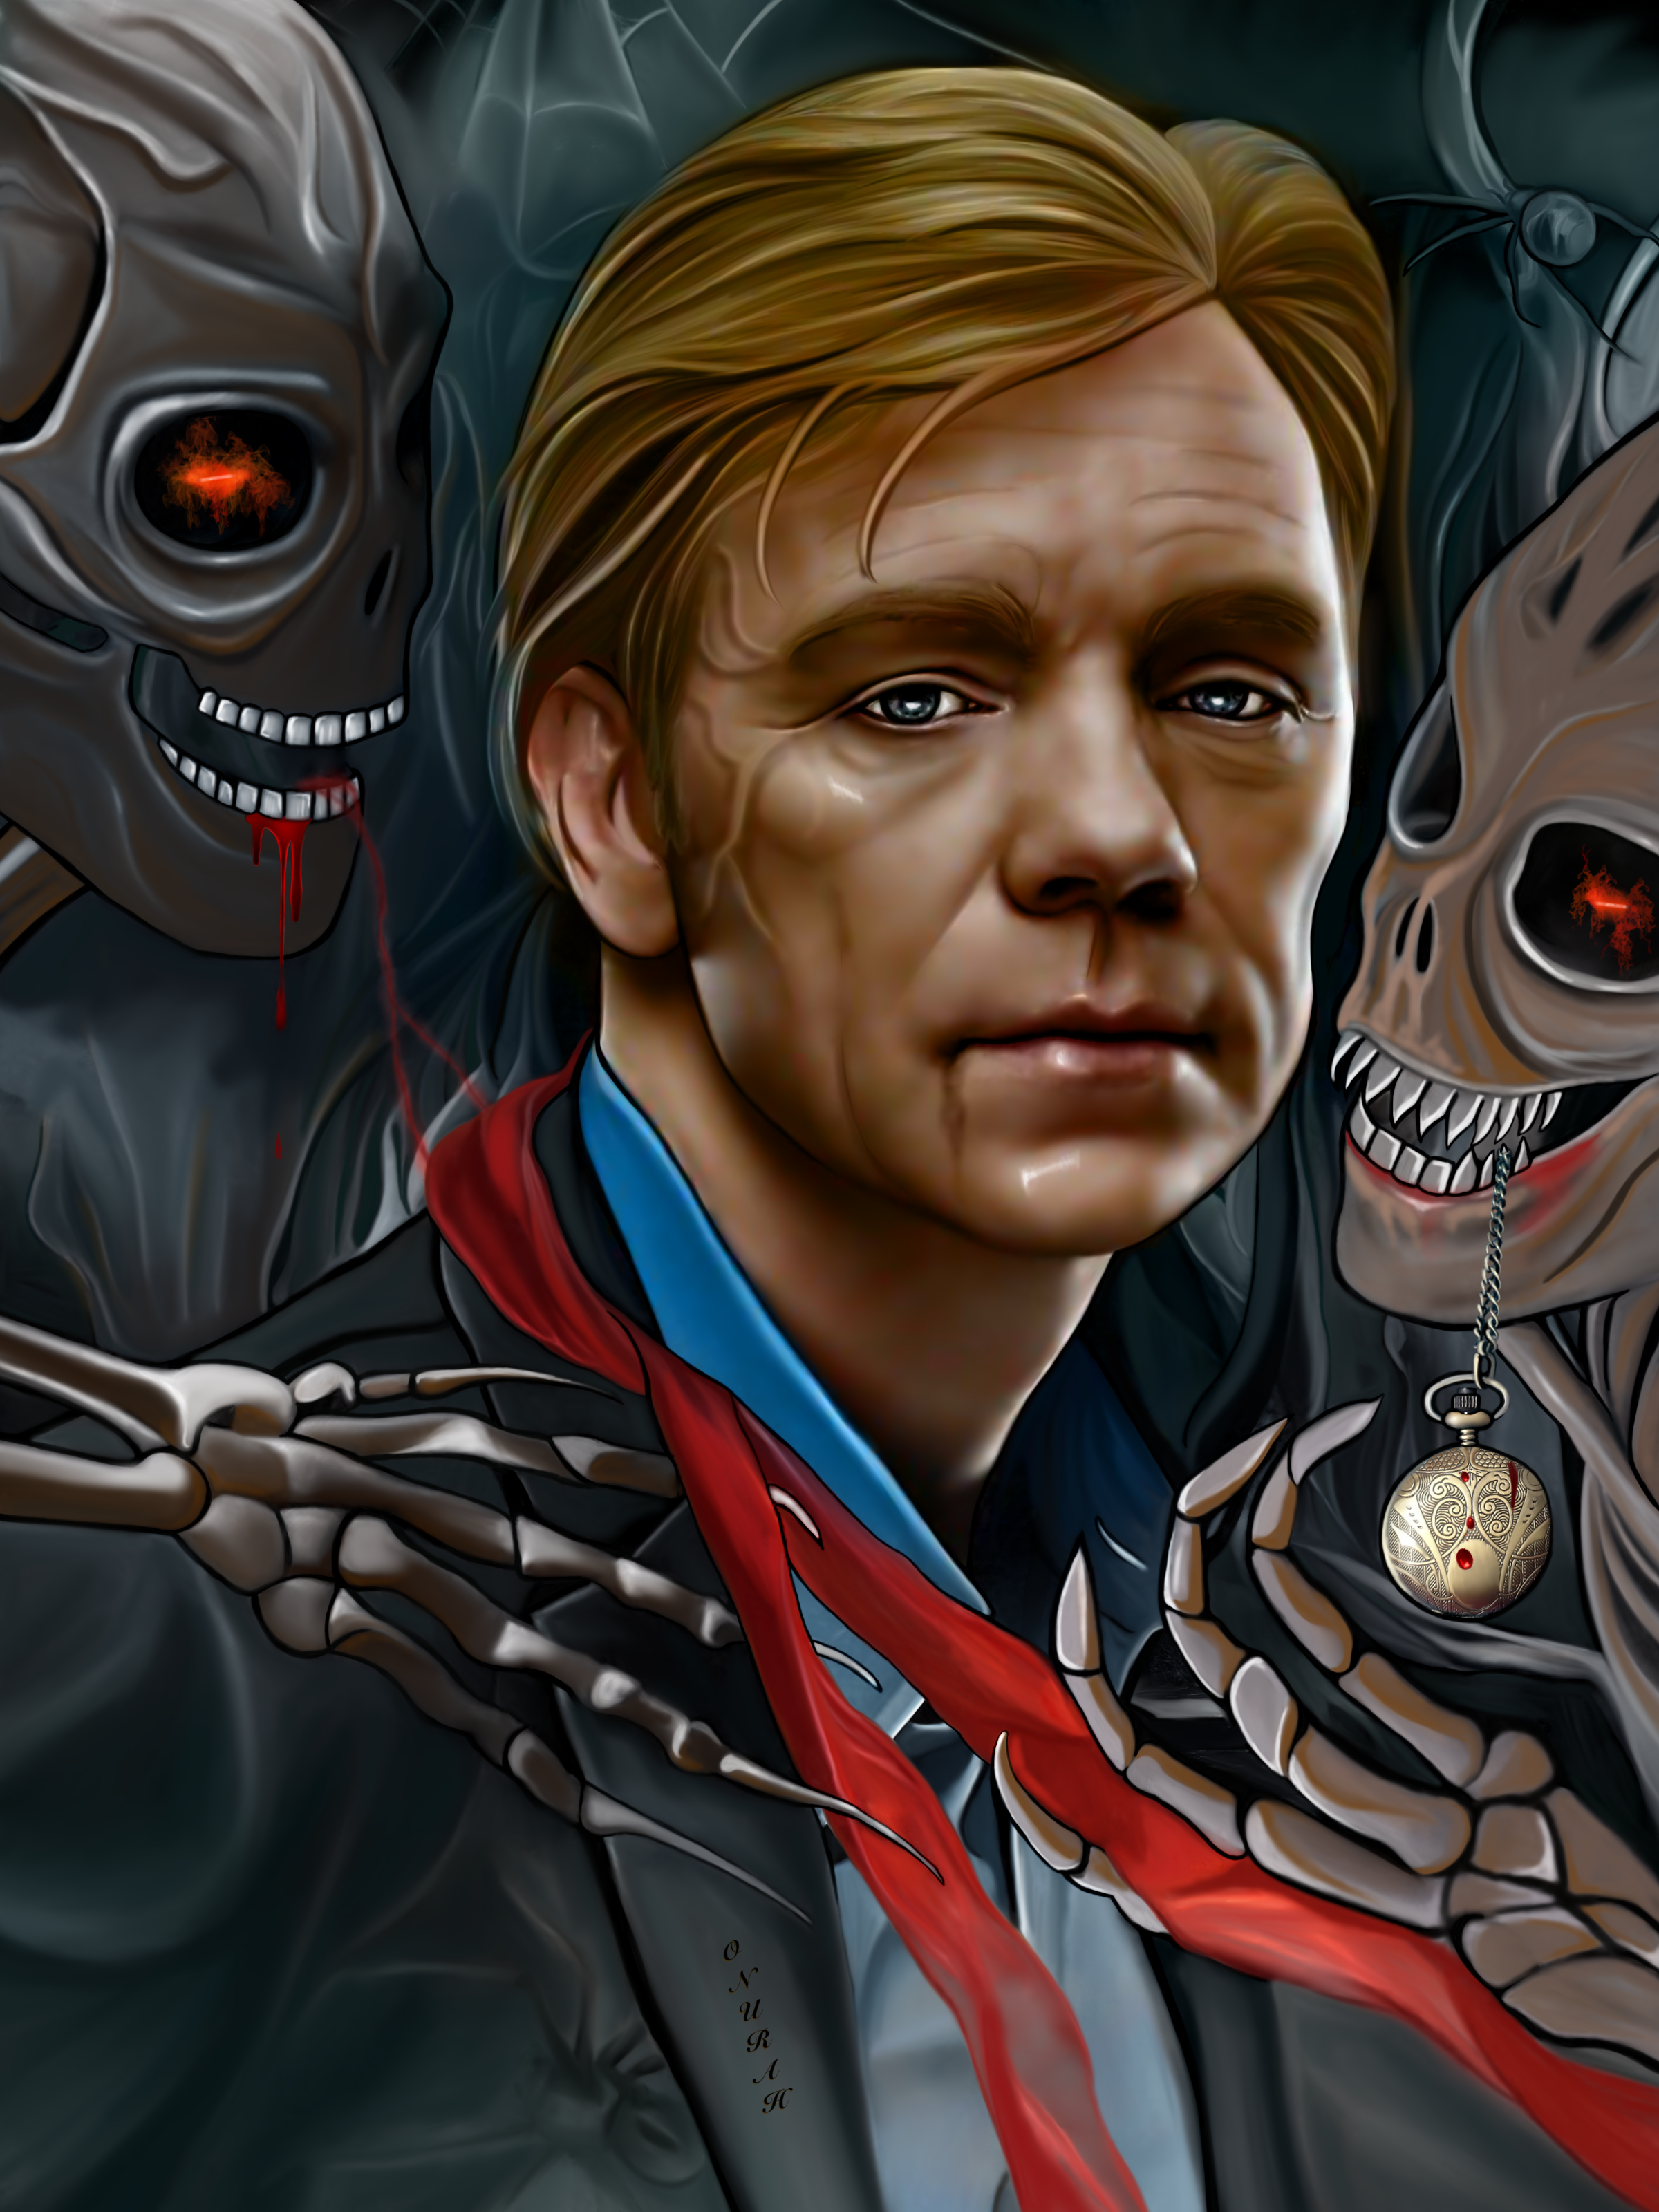 DeviantArt: More Like Best wishes David Caruso by OnurahArt.